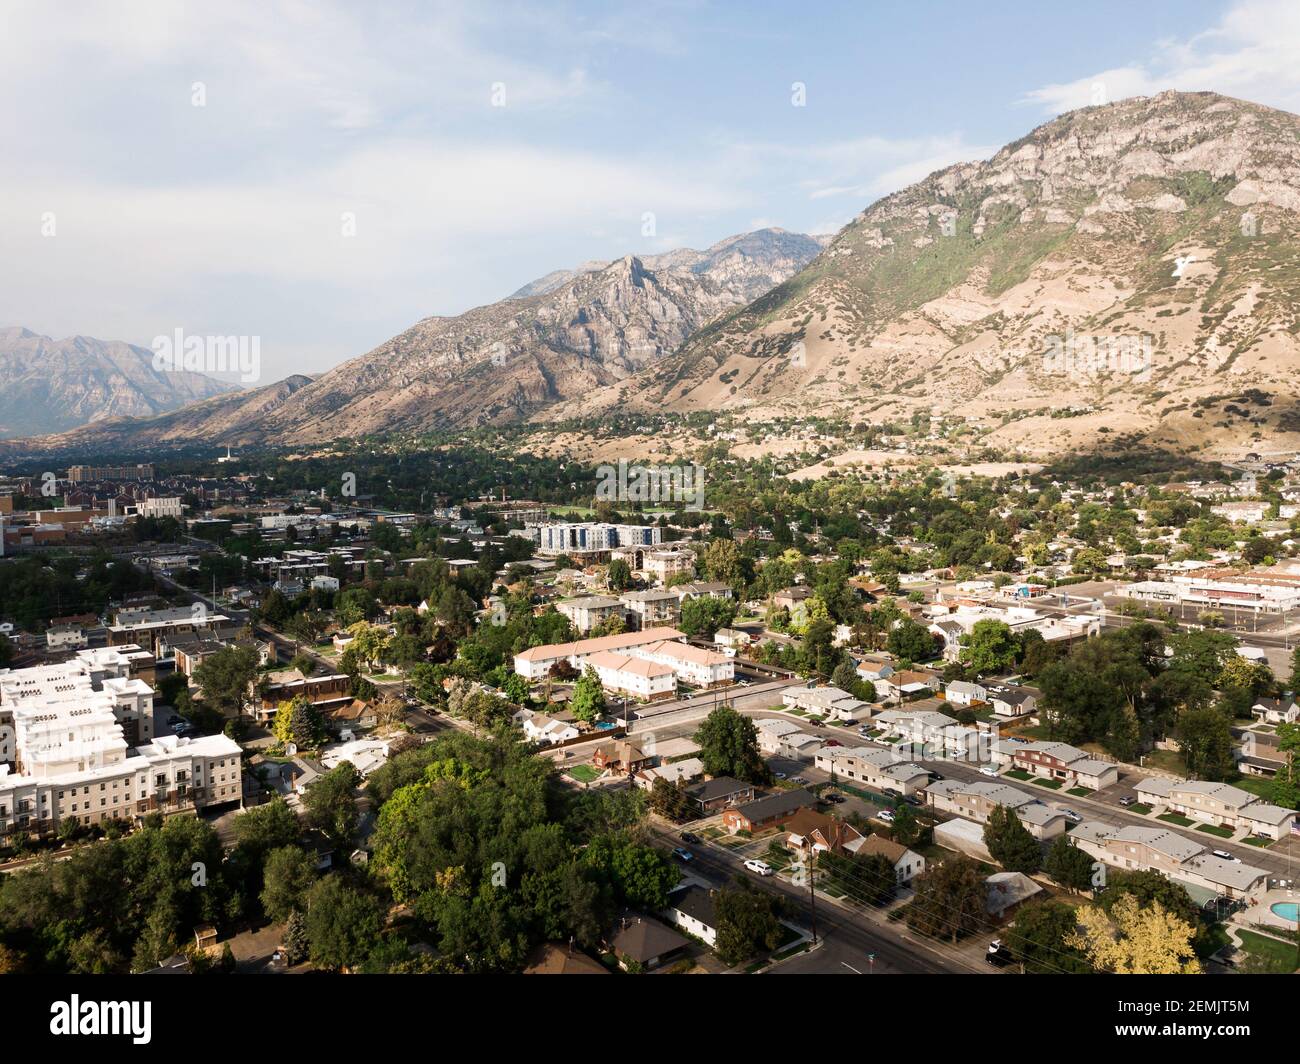 Aerial view of Provo City, Utah, Y Mountain, Brigham Young University, and surrounded neighborhoods Stock Photo